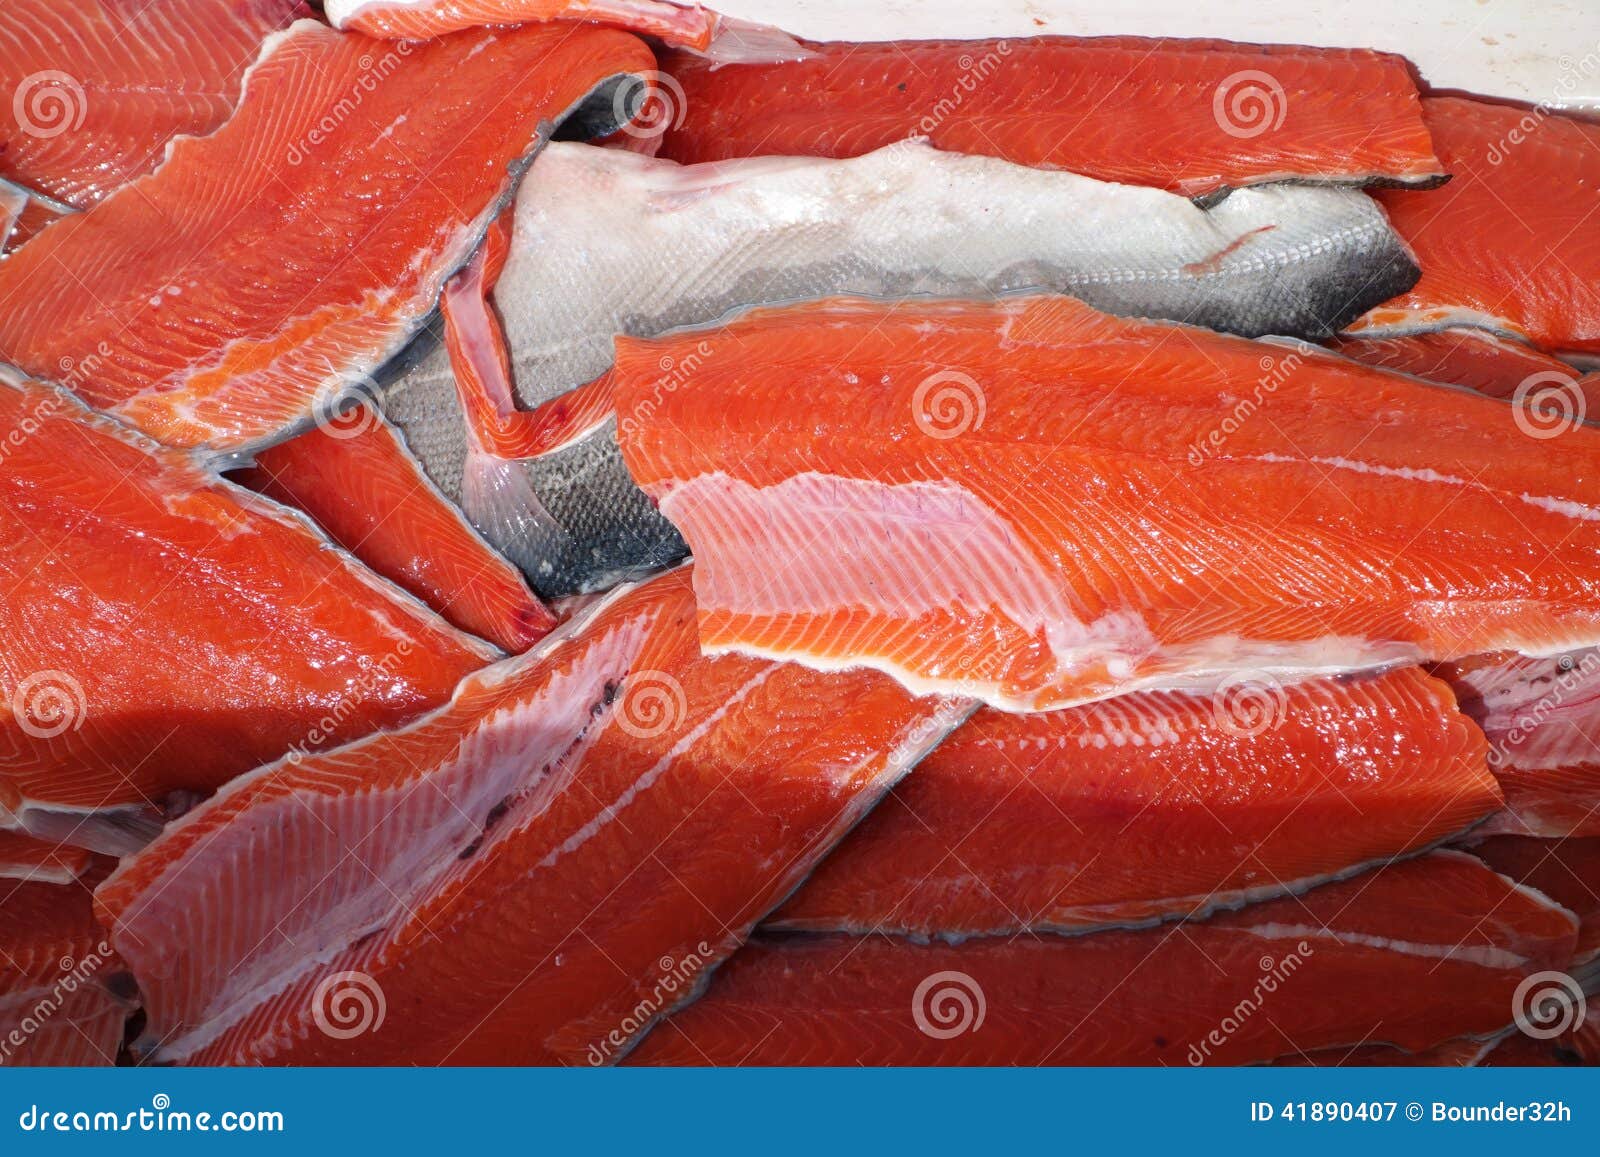 filleted red salmon